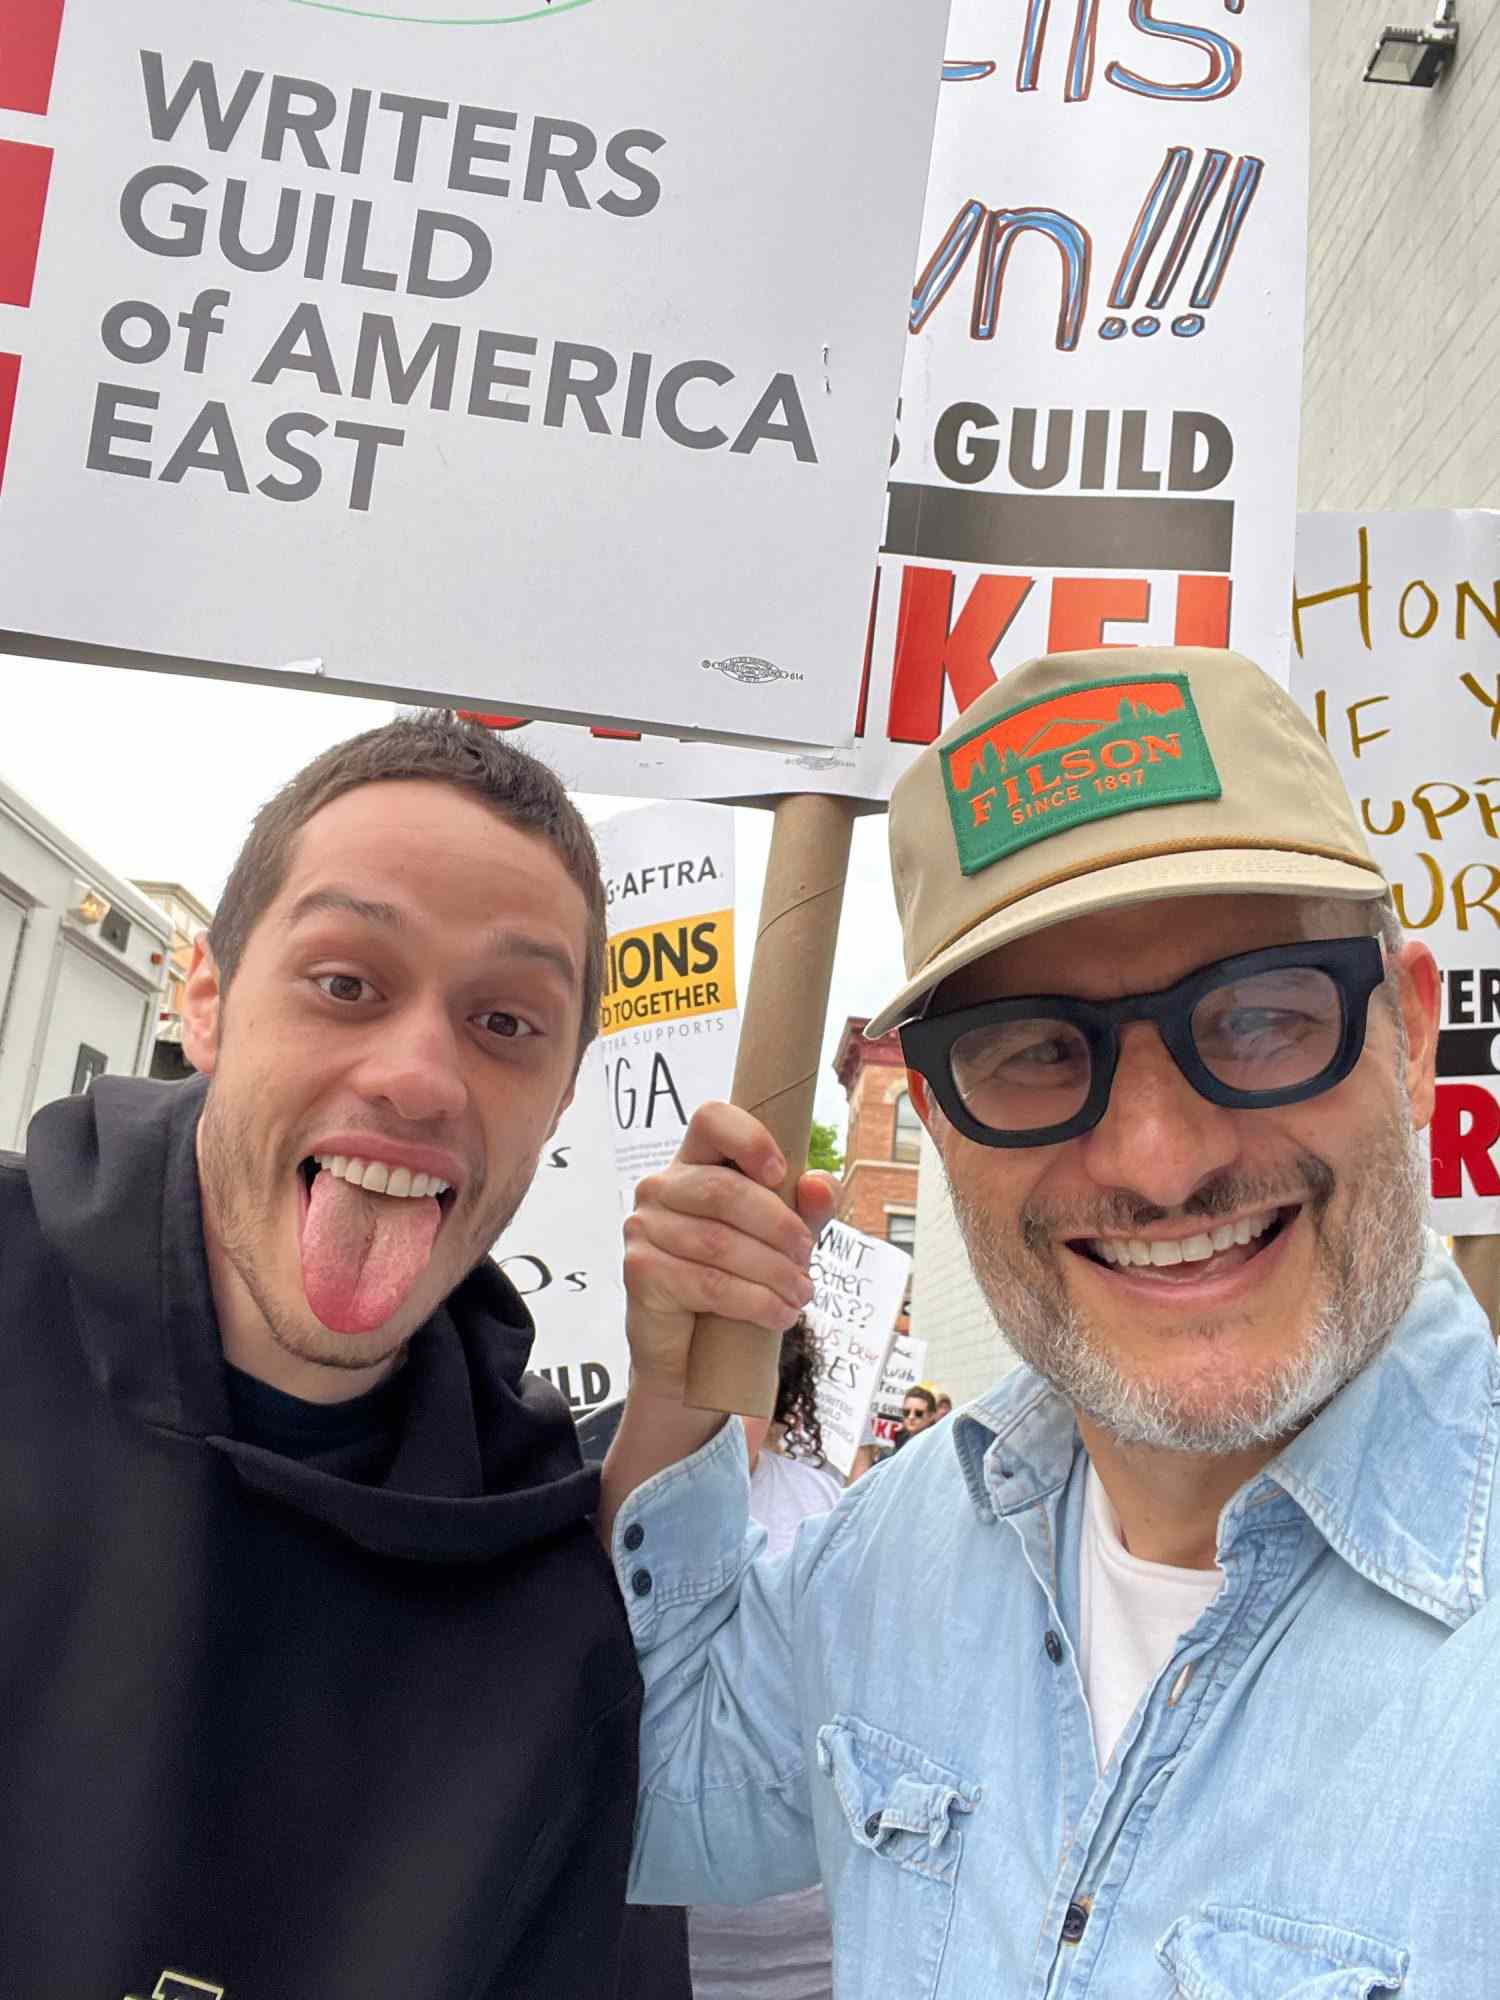 NEW YORK, NEW YORK - MAY 5: Pete Davidson and Judah Miller join members of the Writers Guild of America (WGA) and its supporters to picket outside Silvercup Studios on May 5, 2023 in New York City. Writers Guild of America members have gone on strike in a contract dispute with studios and streaming services over lowering wages, residuals and the future of AI in entertainment. (Photo by Bruce Glikas/Getty Images)